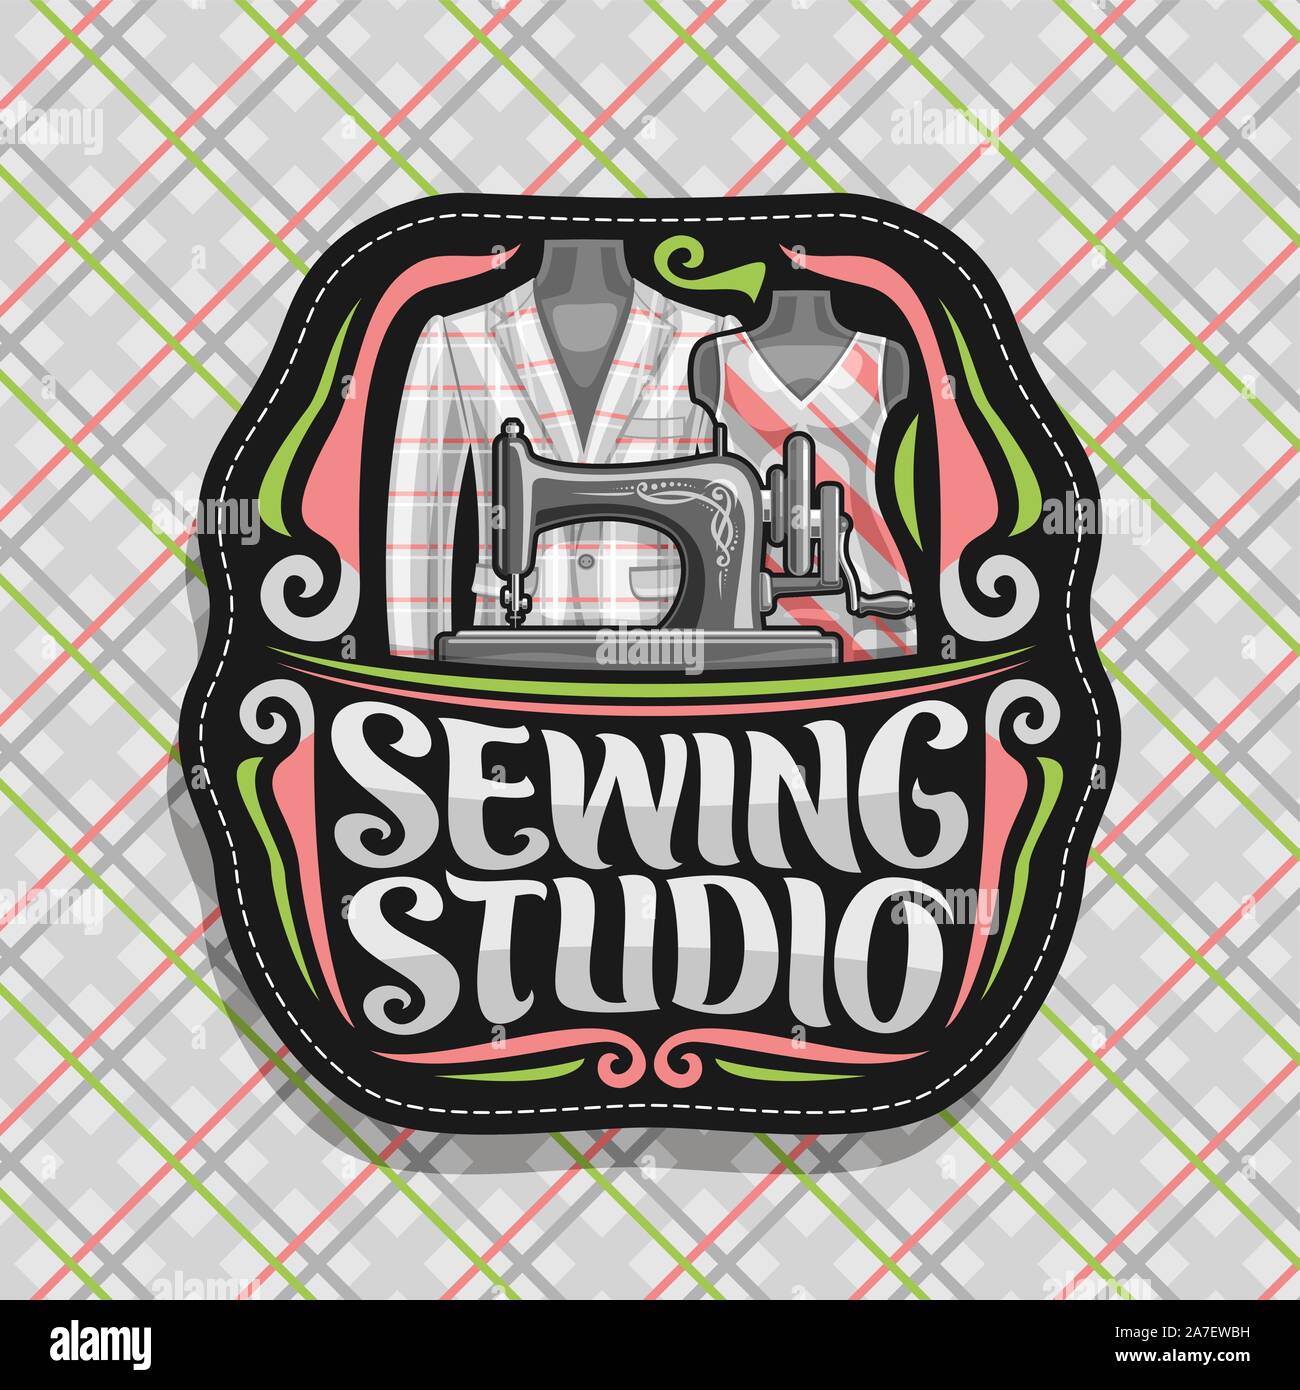 Vector logo for Sewing Studio, black decorative signboard with flourishes, old sewing machine, mens blazer and female dress on dummies, brush letterin Stock Vector